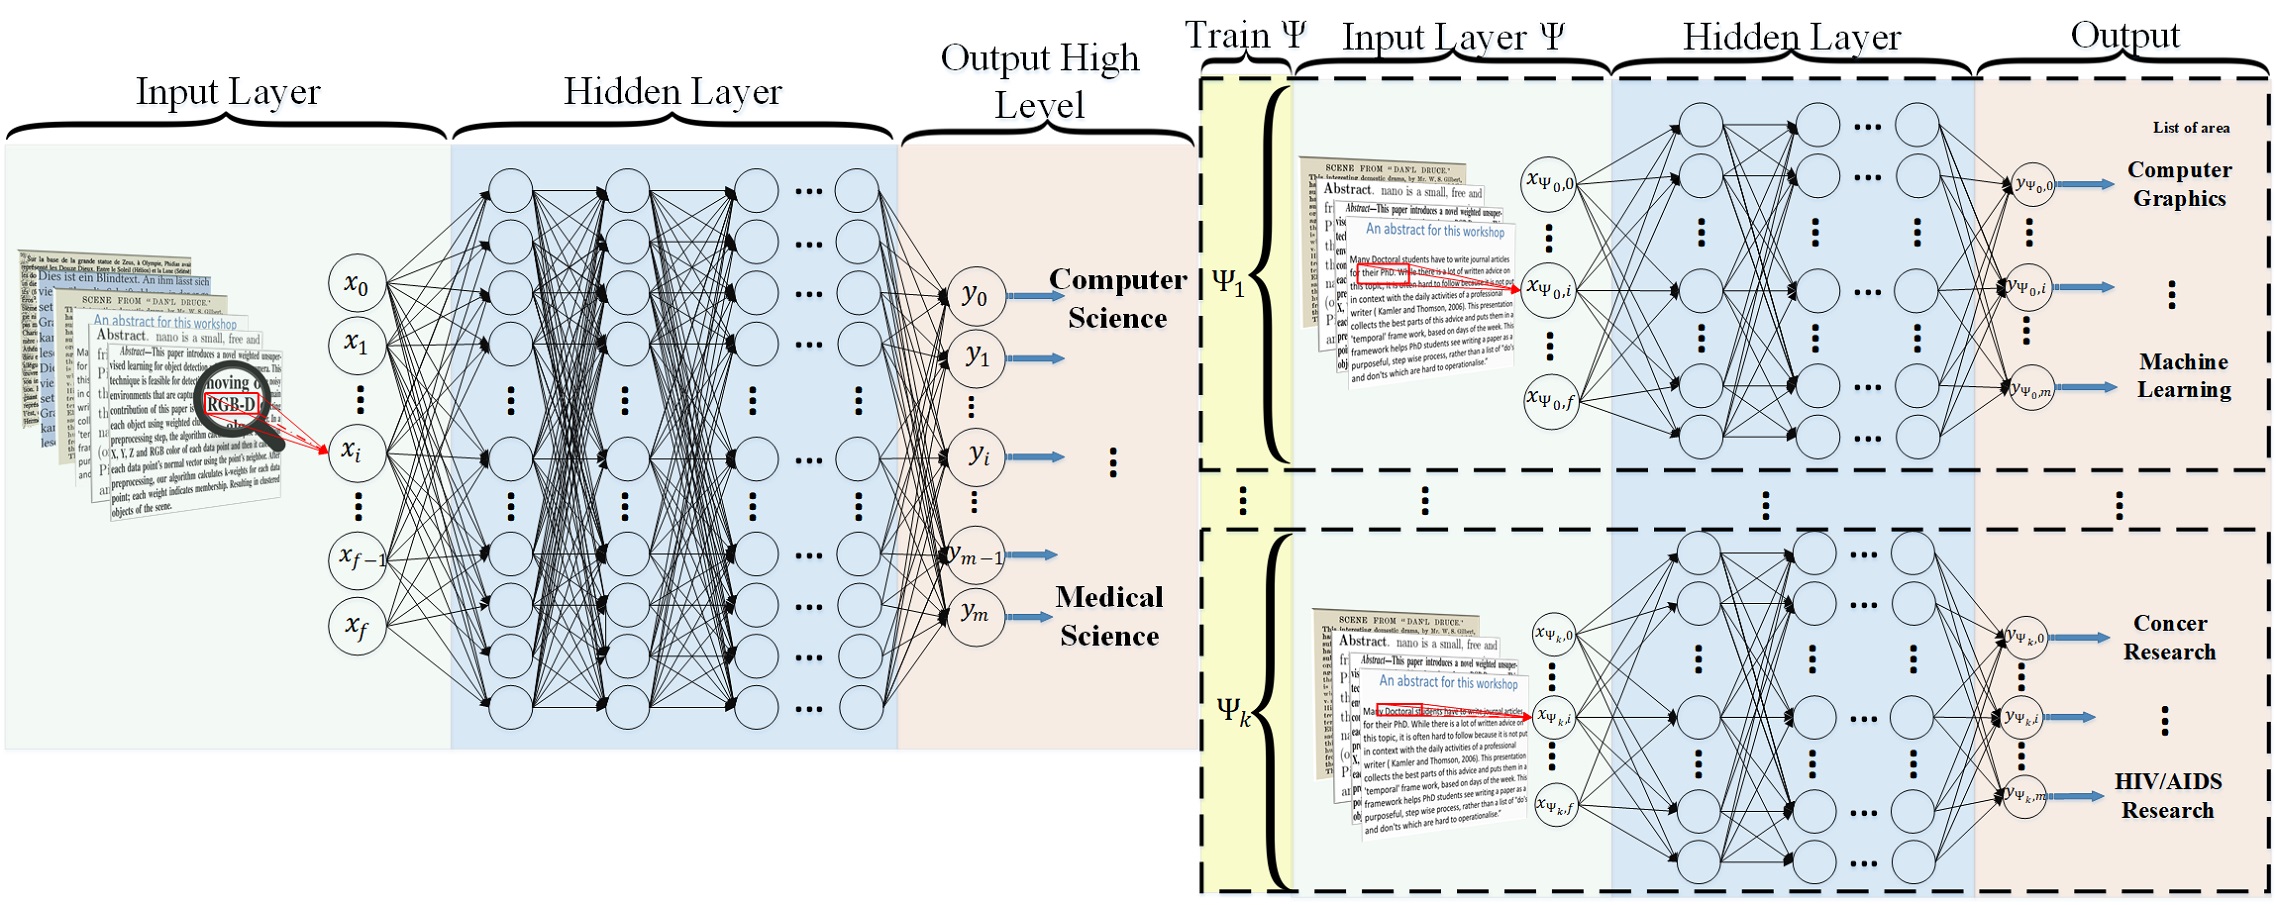 HDLTex: Hierarchical Deep Learning for Text Classification